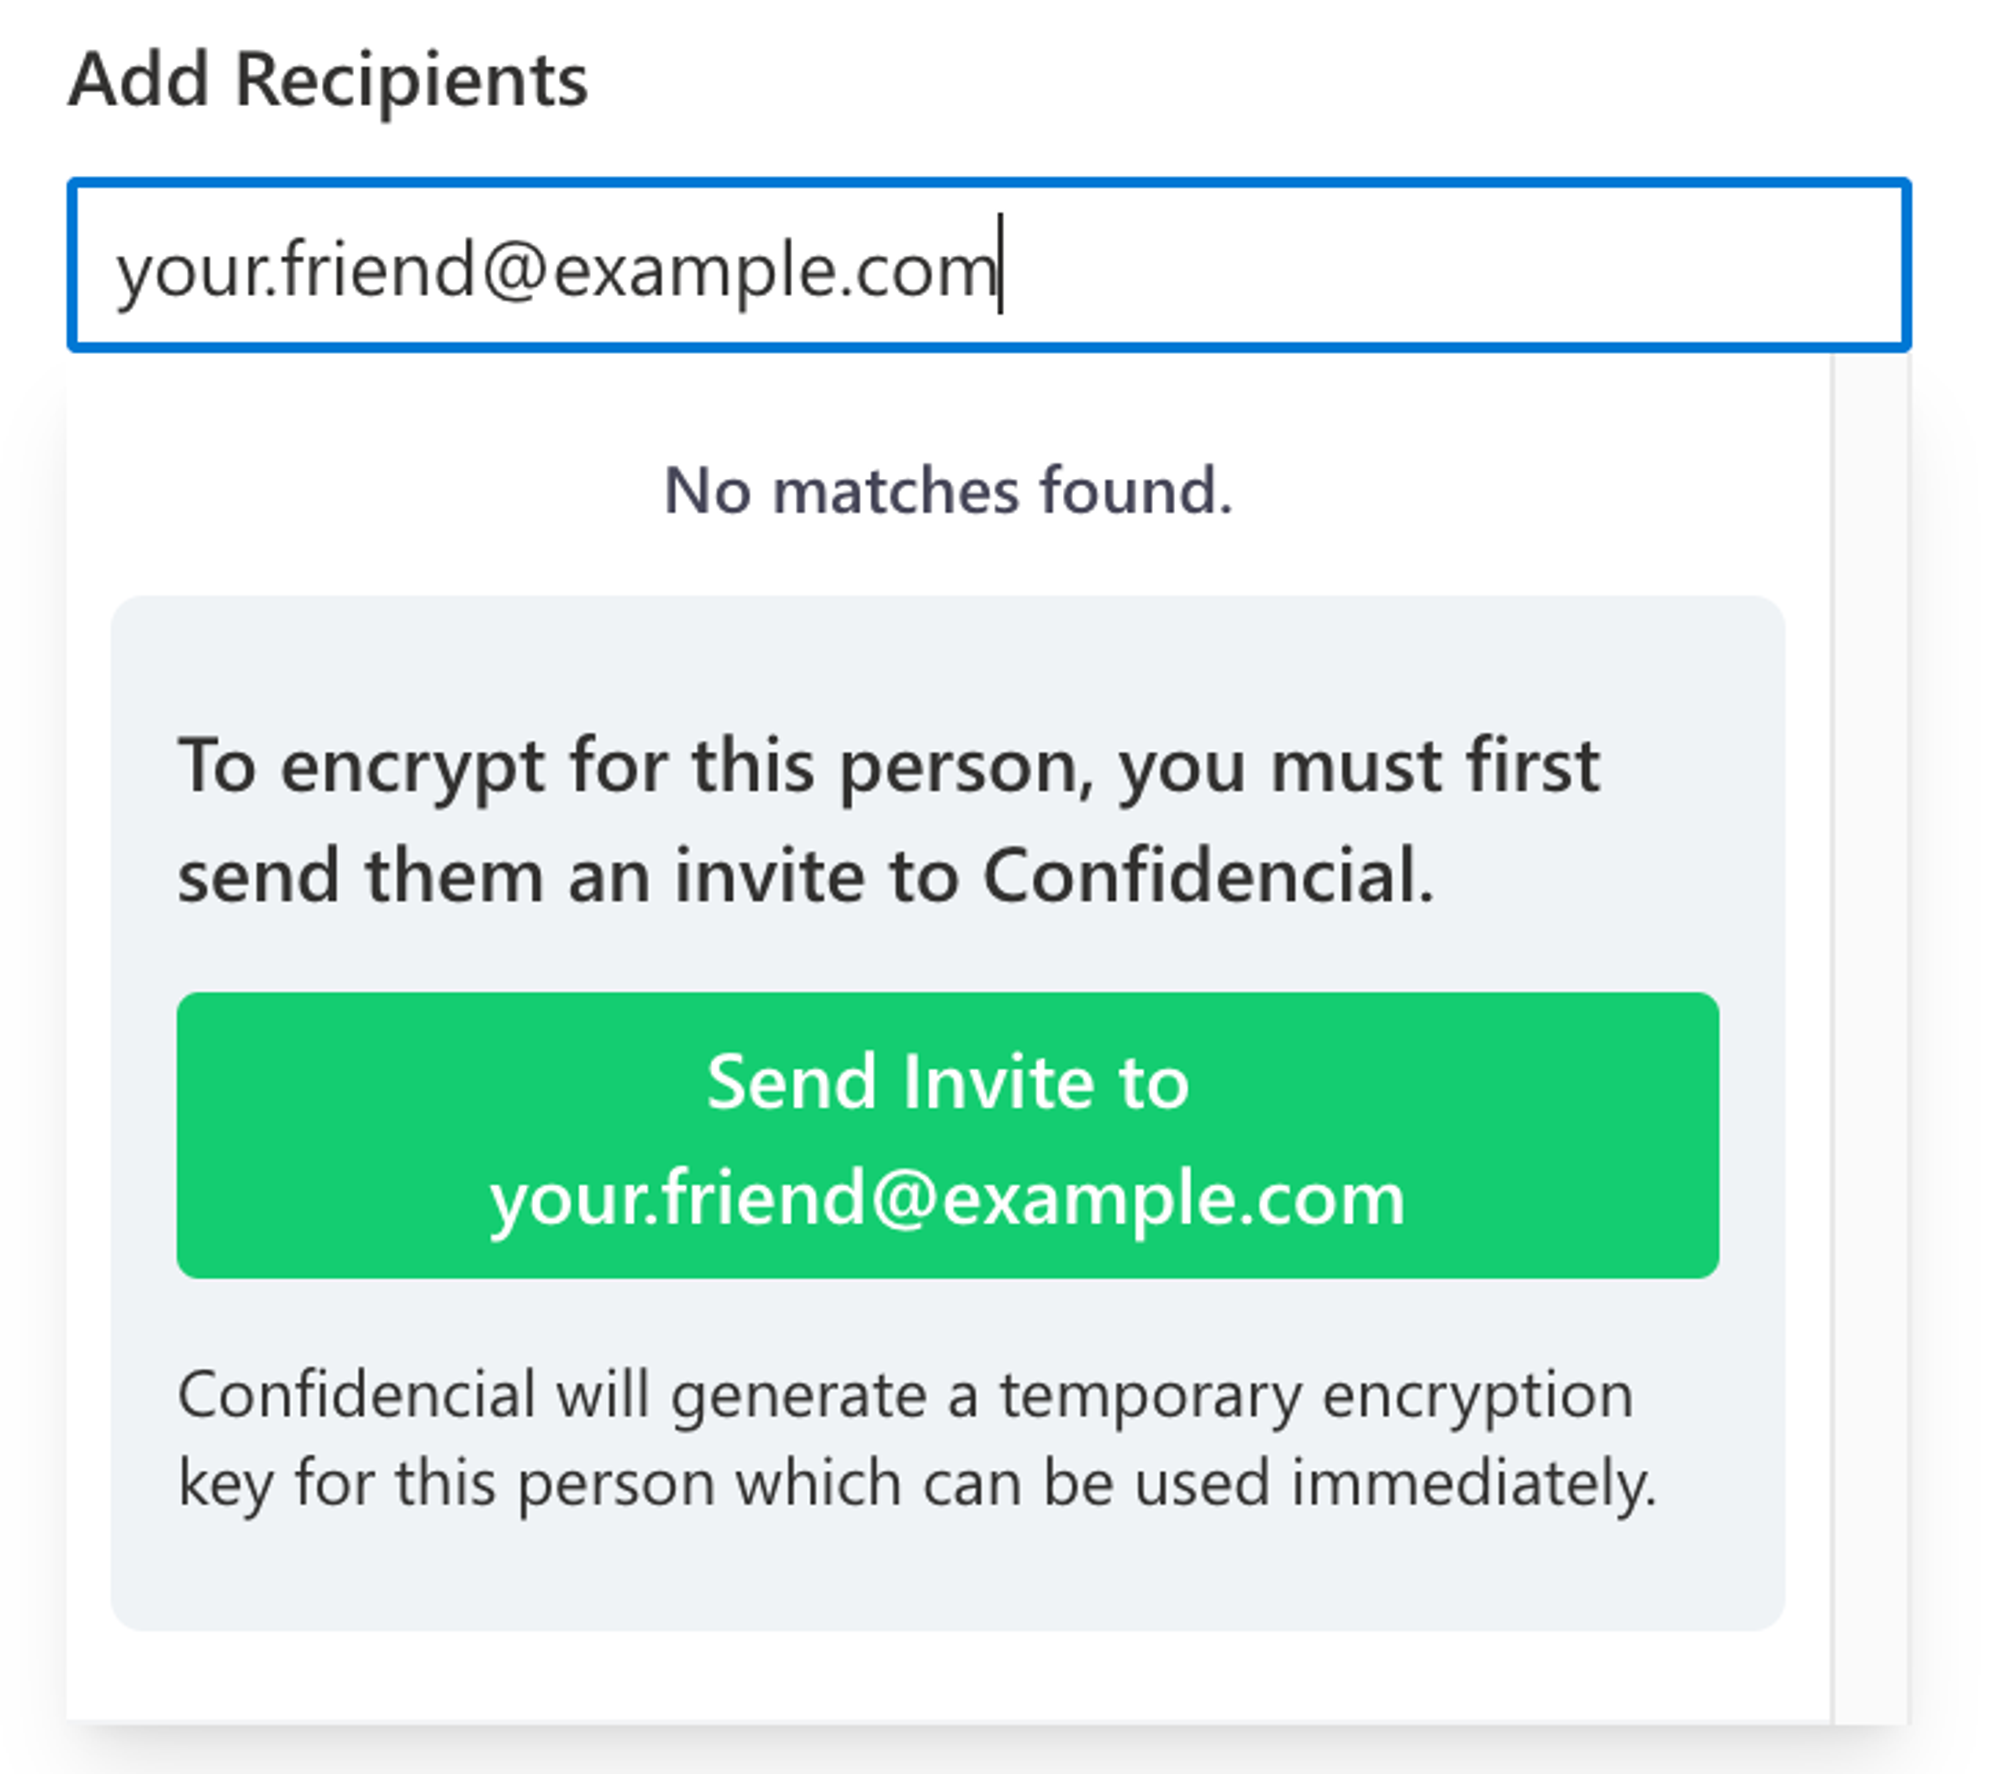 If the users doesn’t already have a Confidencial account, an invitation button will appear